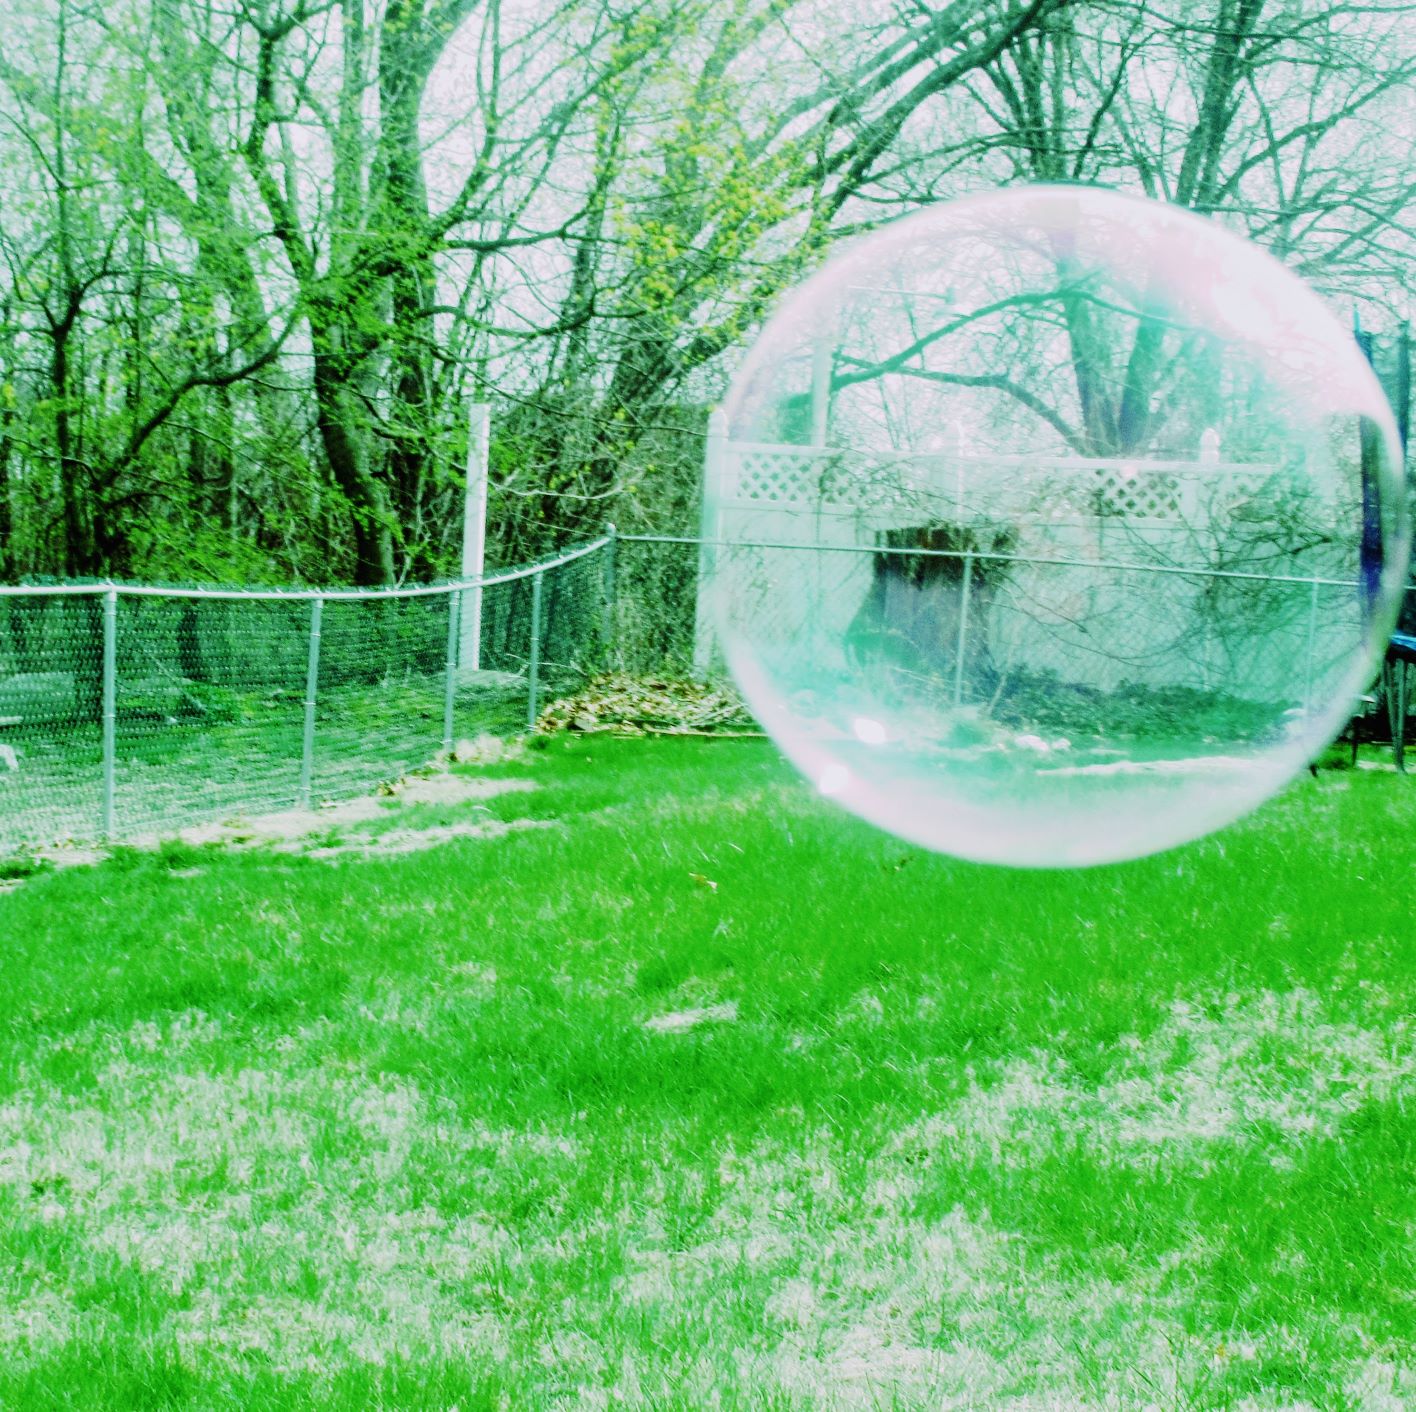 Living In A Bubble -photograph by Tara Bronner